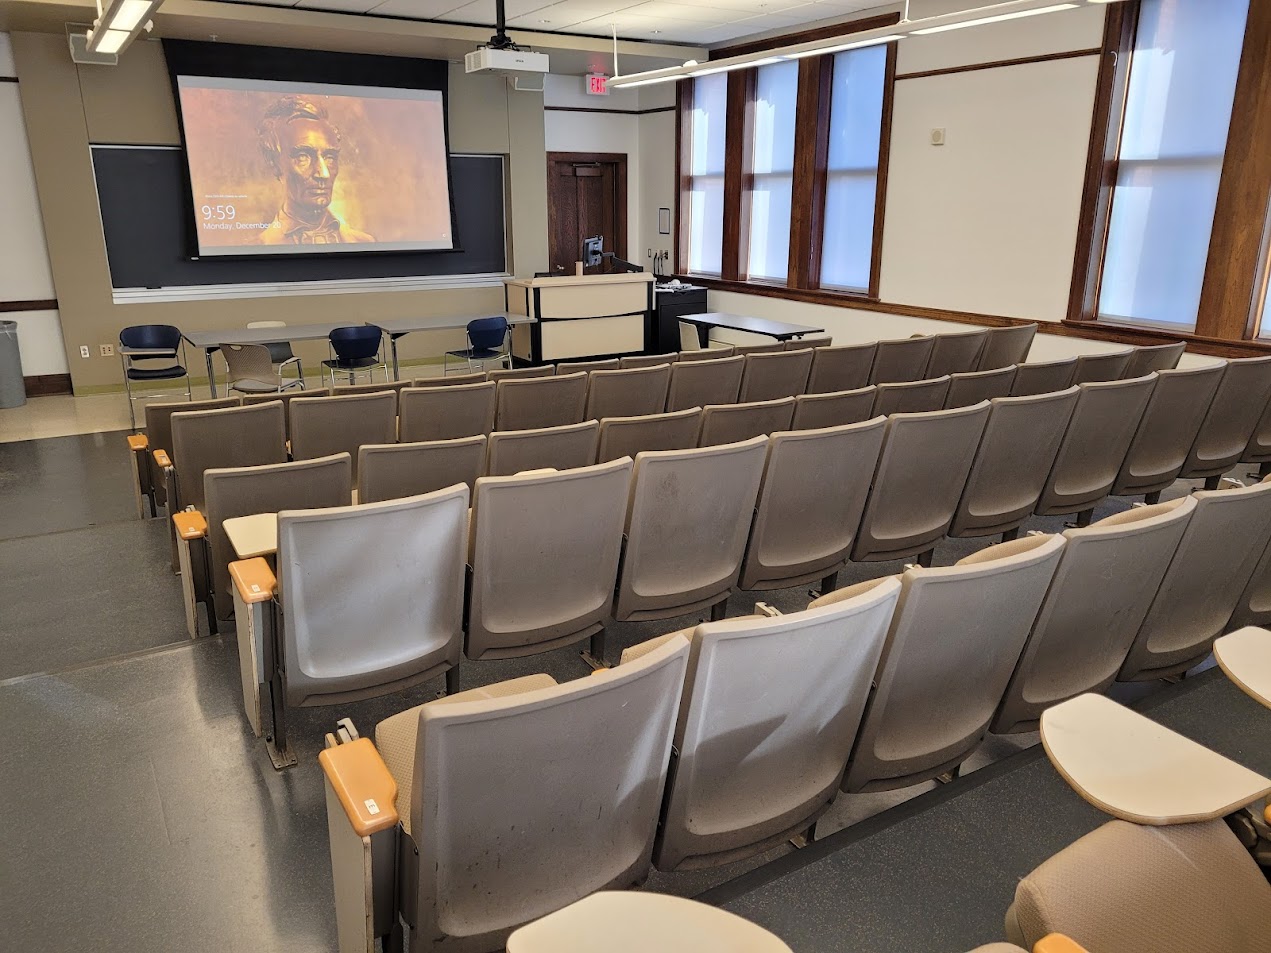 A view of the classroom with Theatre Auditorium Seating and chalkboard in front.